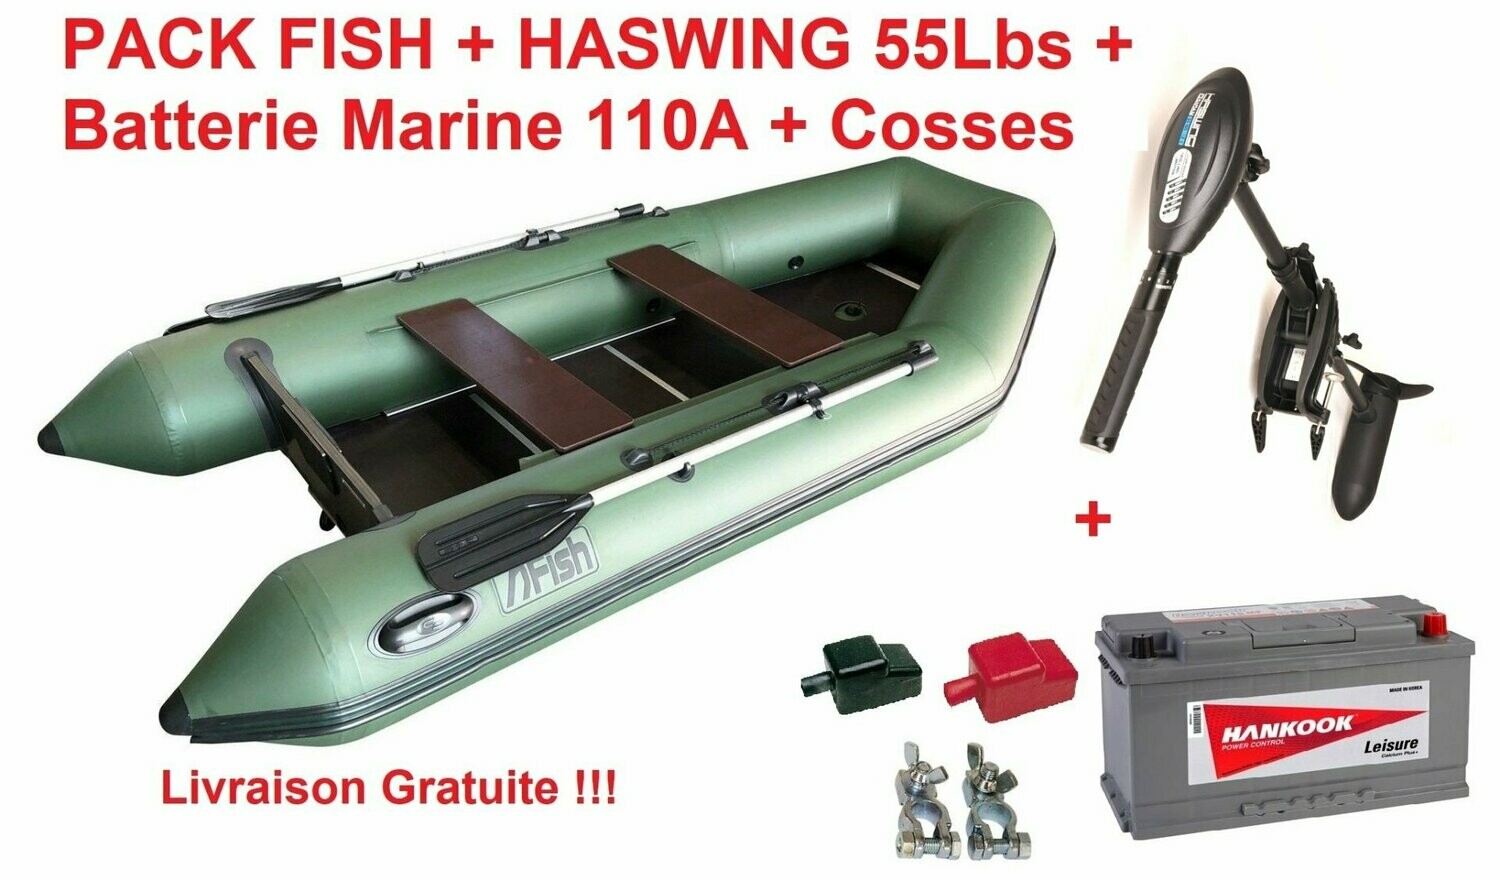 PACK COMPLET FISH + Moteur HASWING 55Lbs +Batterie Marine 110A